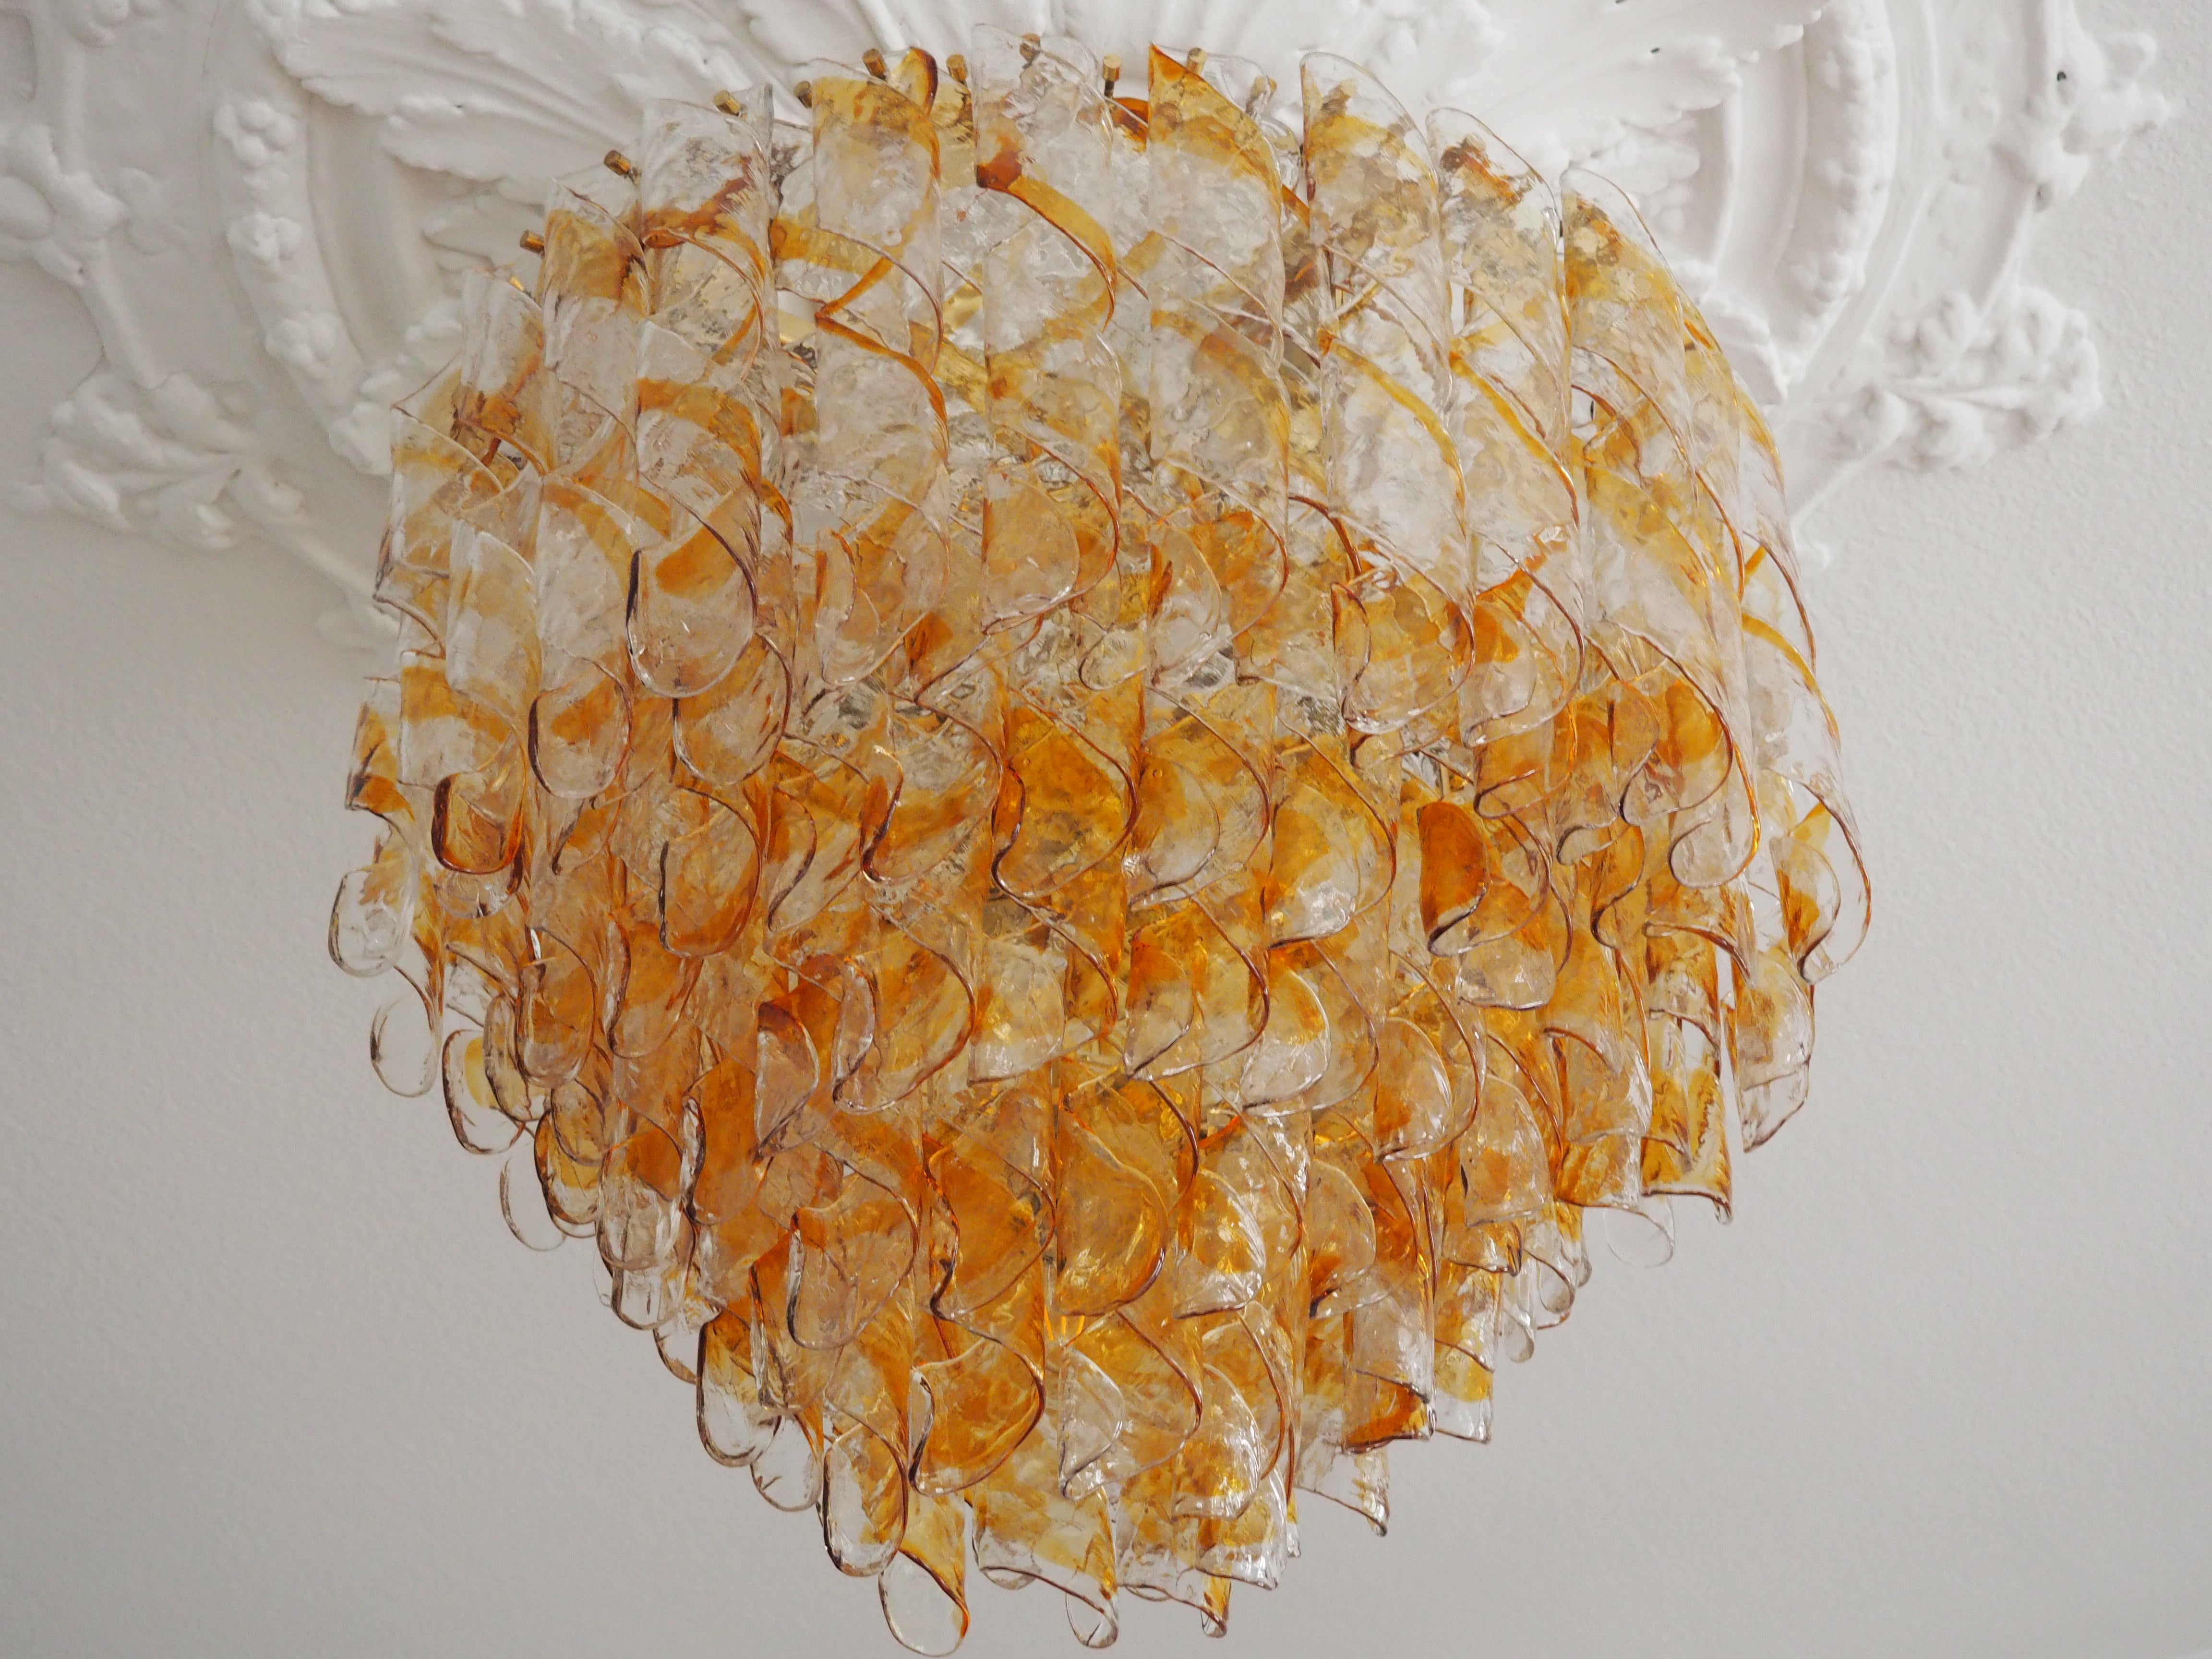 Rare and huge mid-century structured spiral Murano glass chandelier by Kaiser, Germany, circa 1960s.
The chandelier is made of over 100 Mazzega Murano 